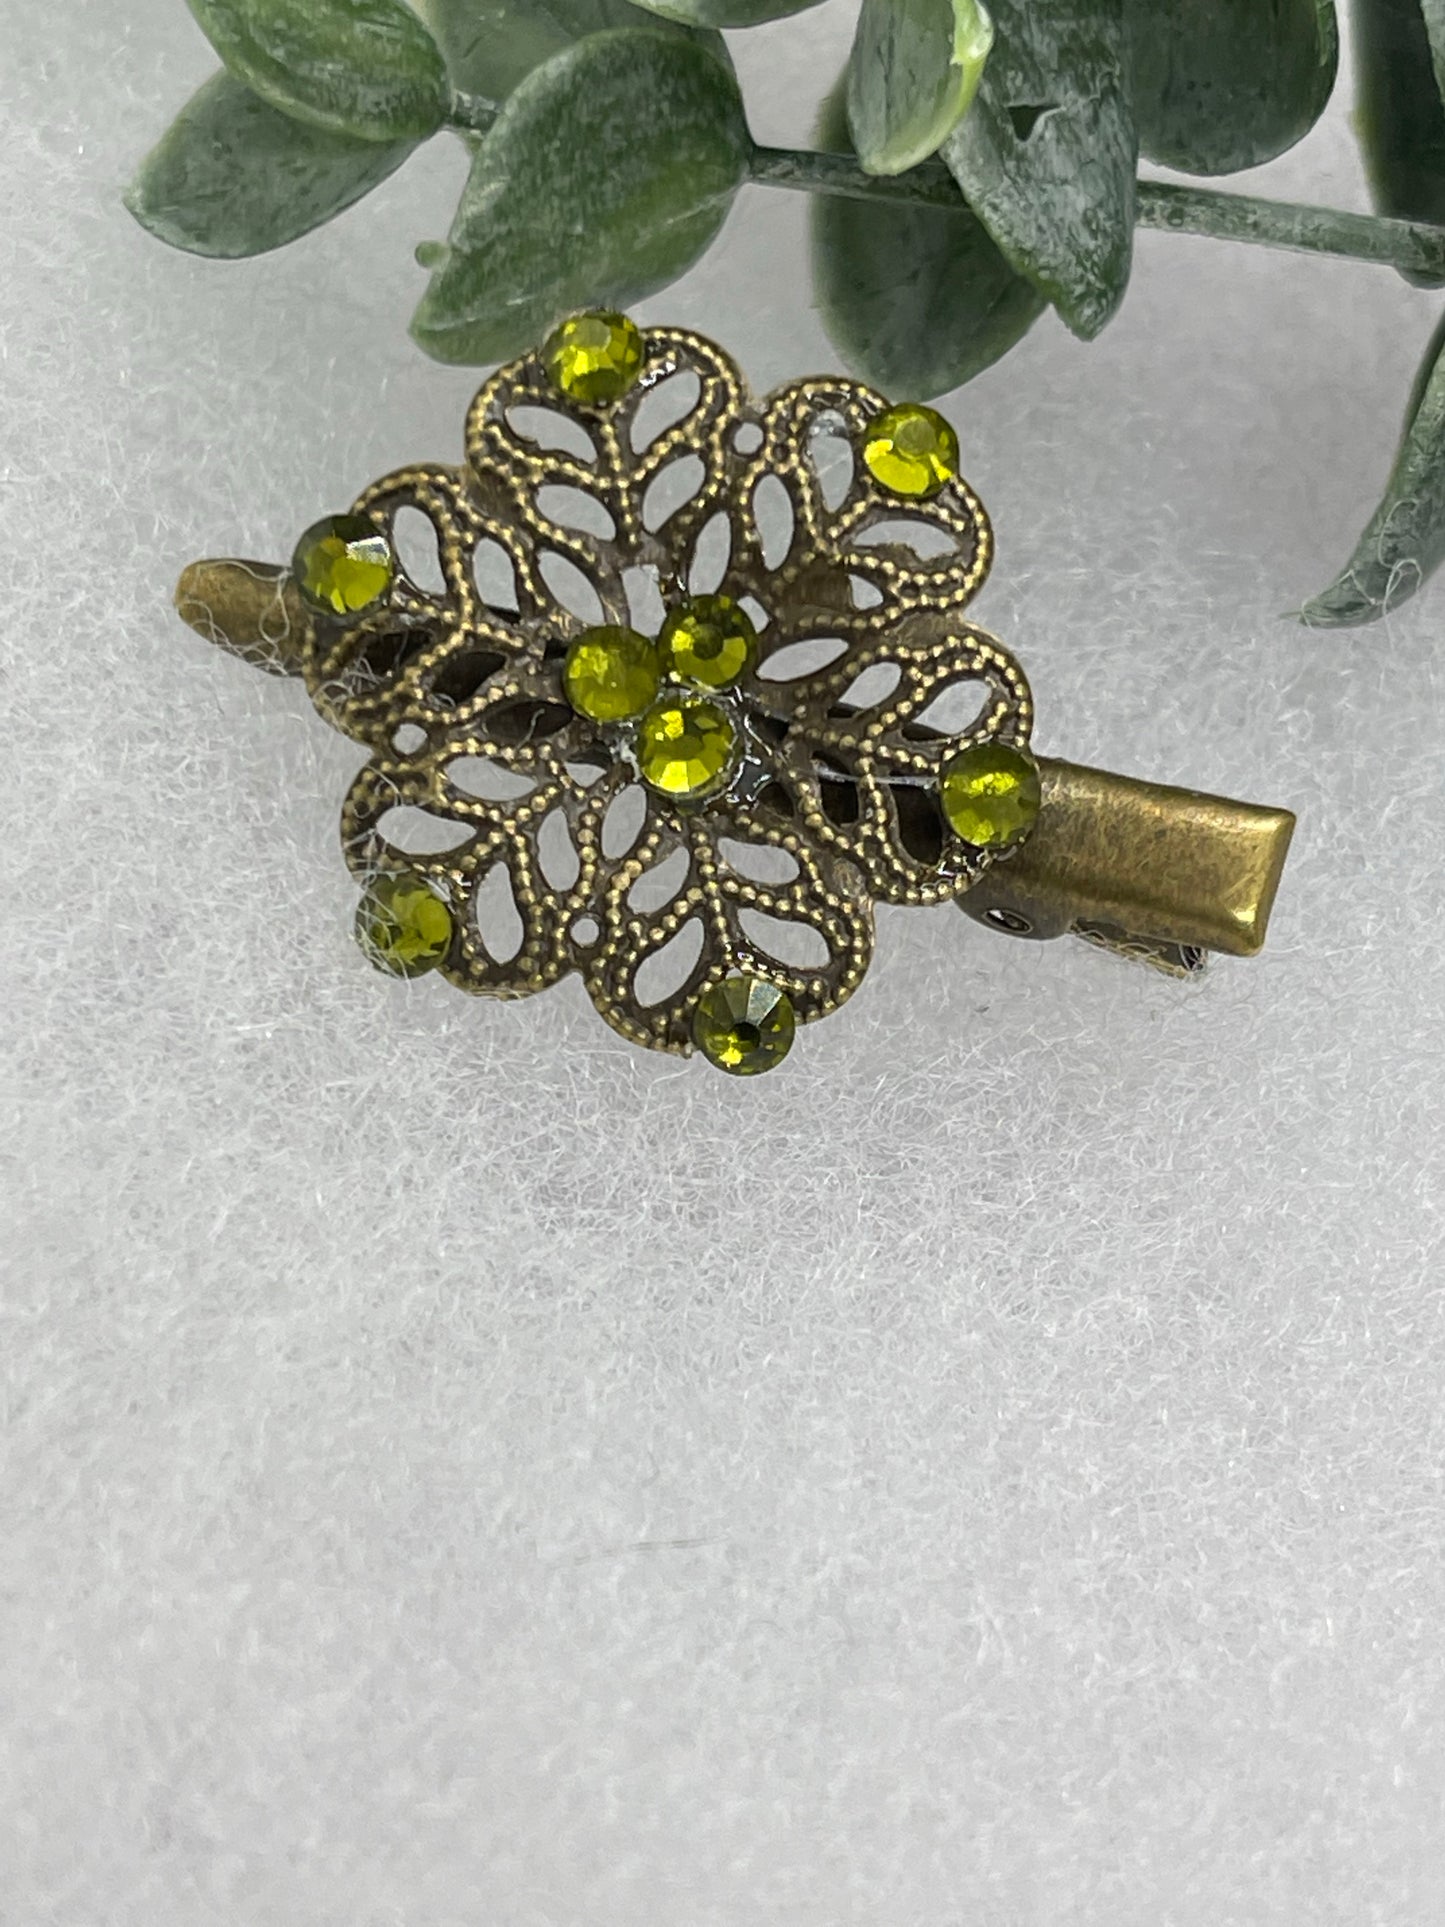 Lime yellow Crystal vintage antique style flower hair alligator clip approximately 2.0” long Handmade hair accessory bridal wedding Retro